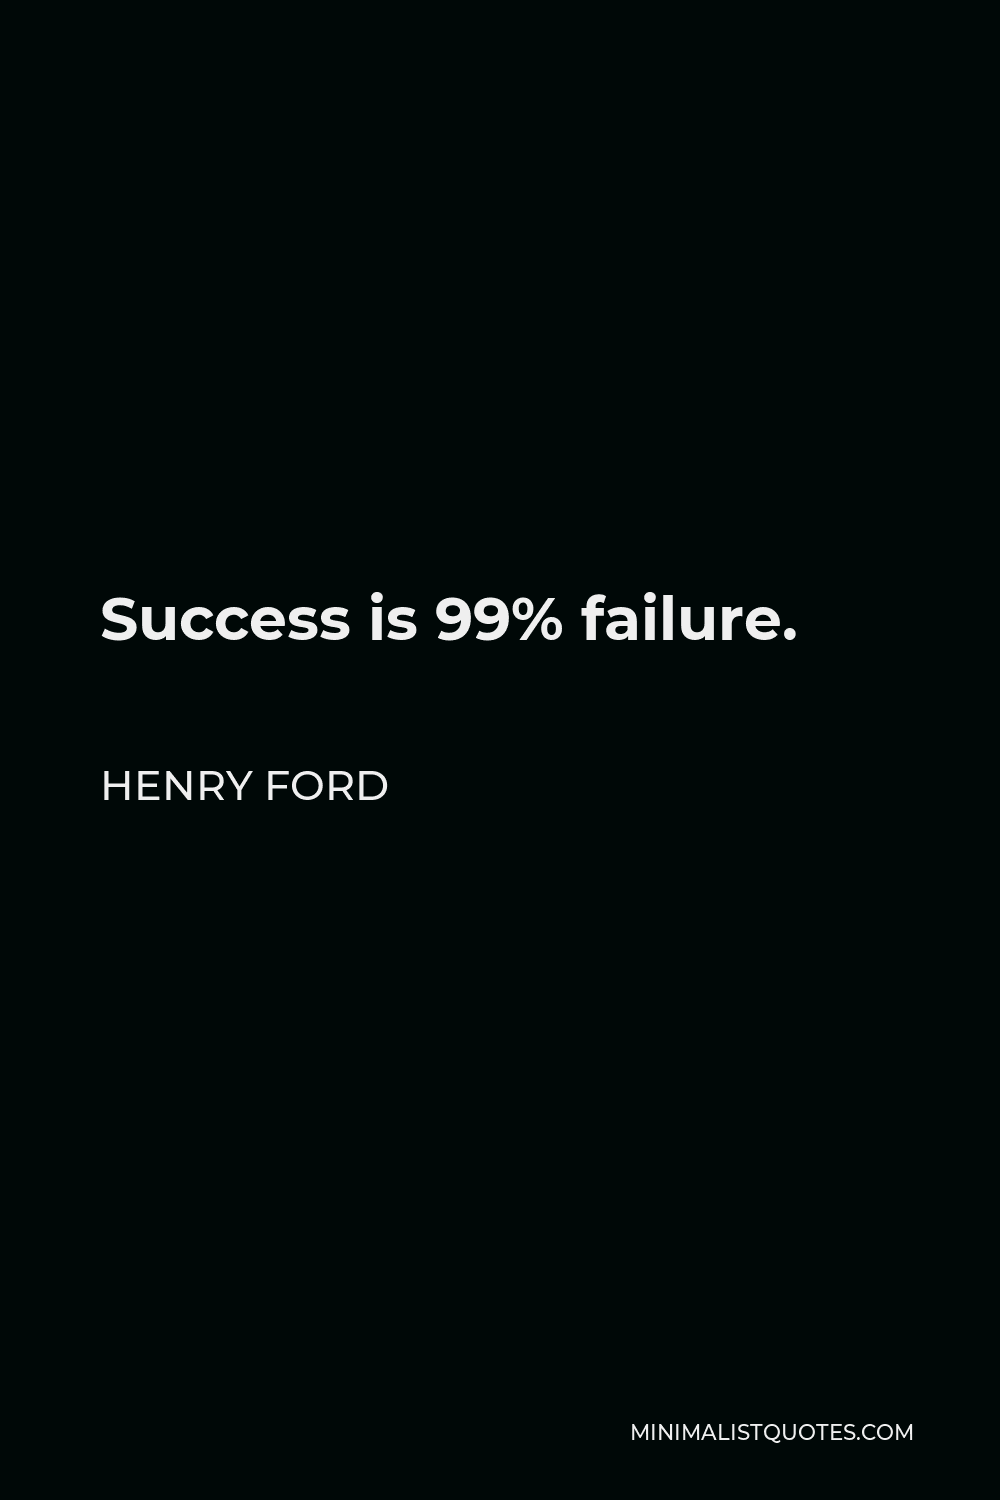 Henry Ford Quote - Success is 99% failure.